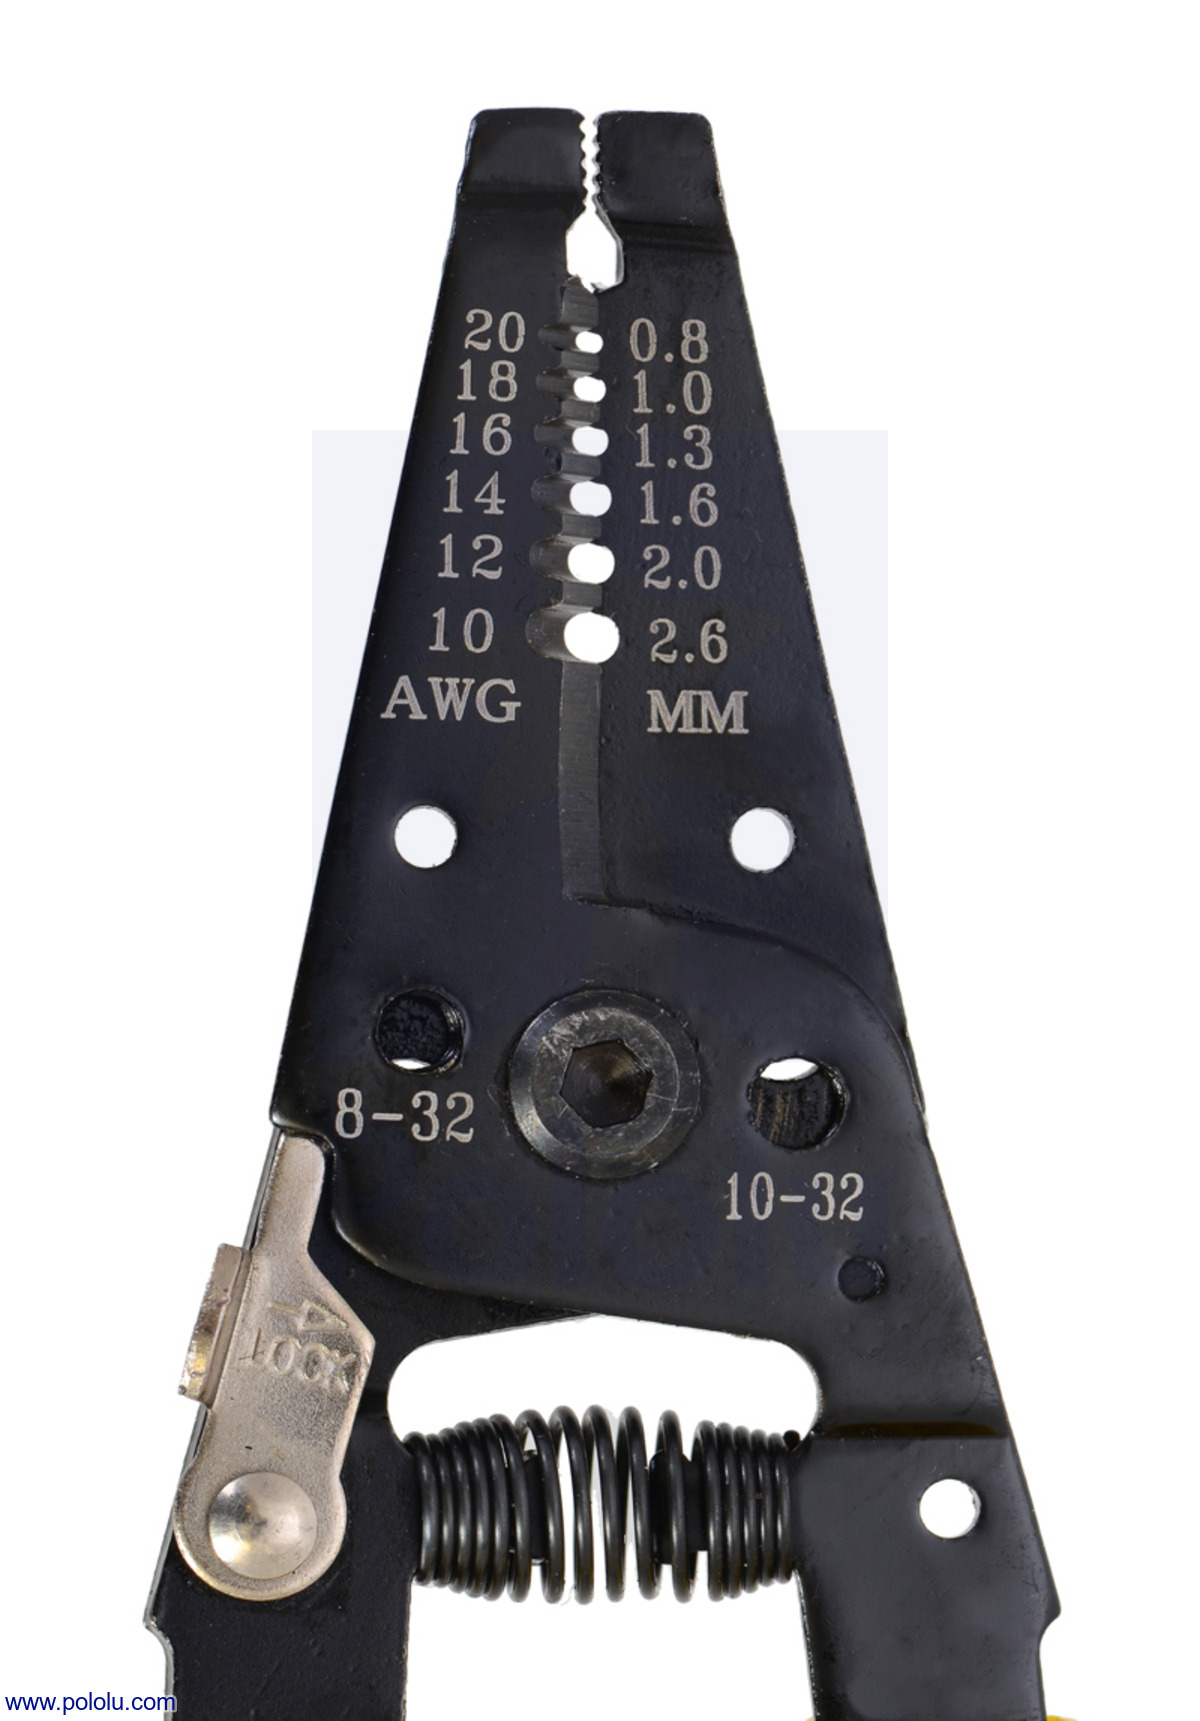 Wire Stripper and Cutter for 10-20 AWG Solid Wire and 0.8-2.6 mm Stranded Wire 